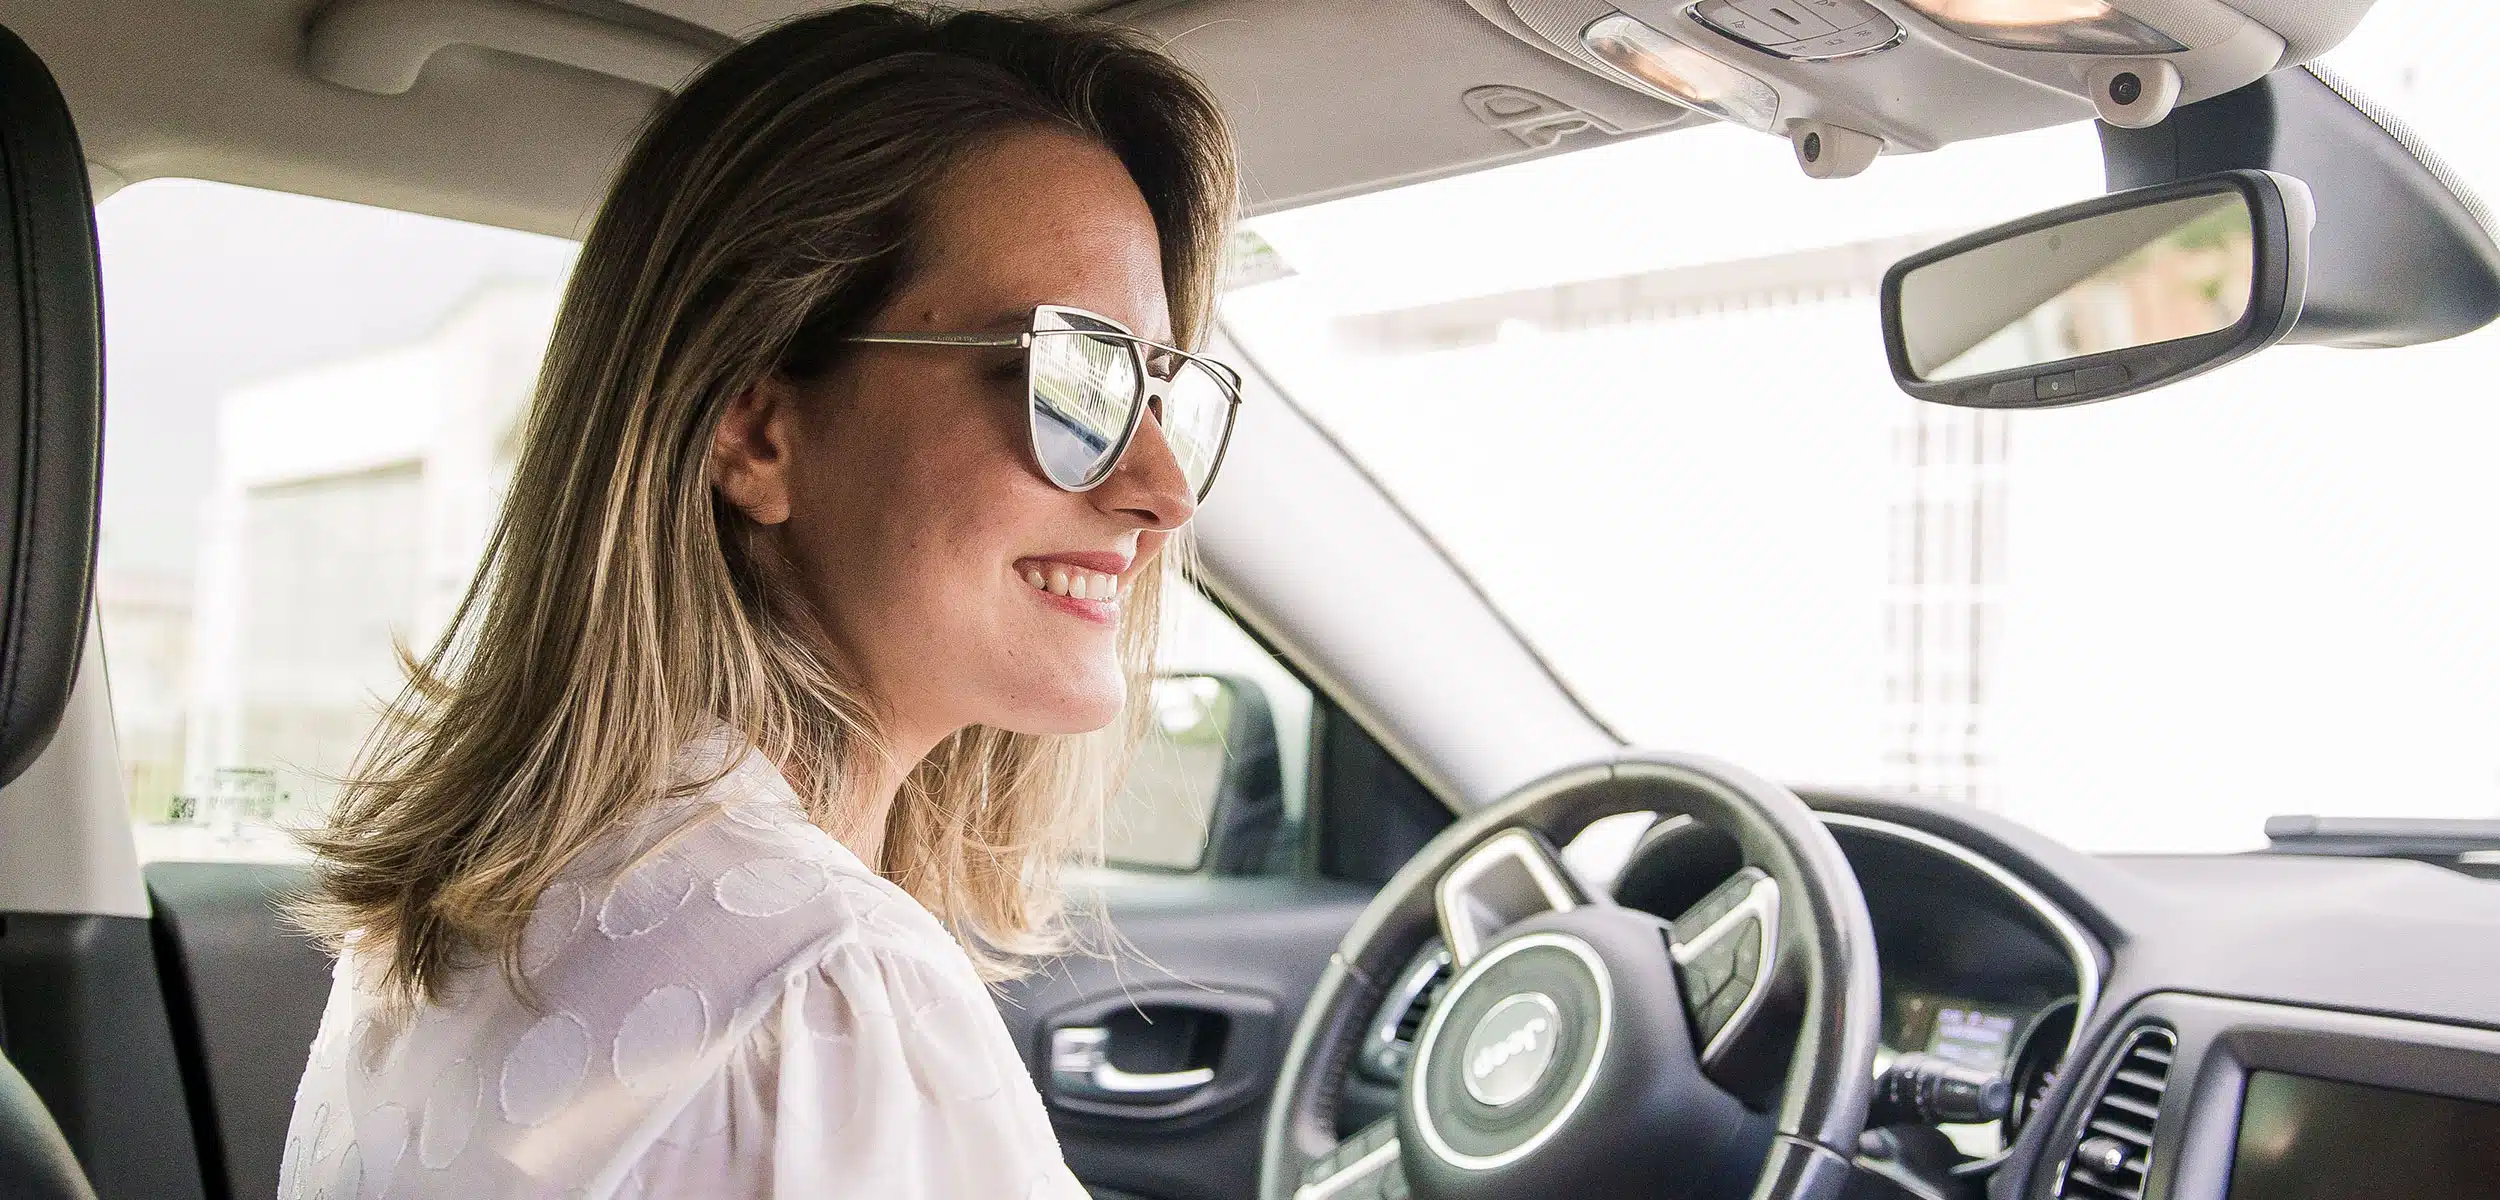 Smiling woman behind the wheel of a vehicle.